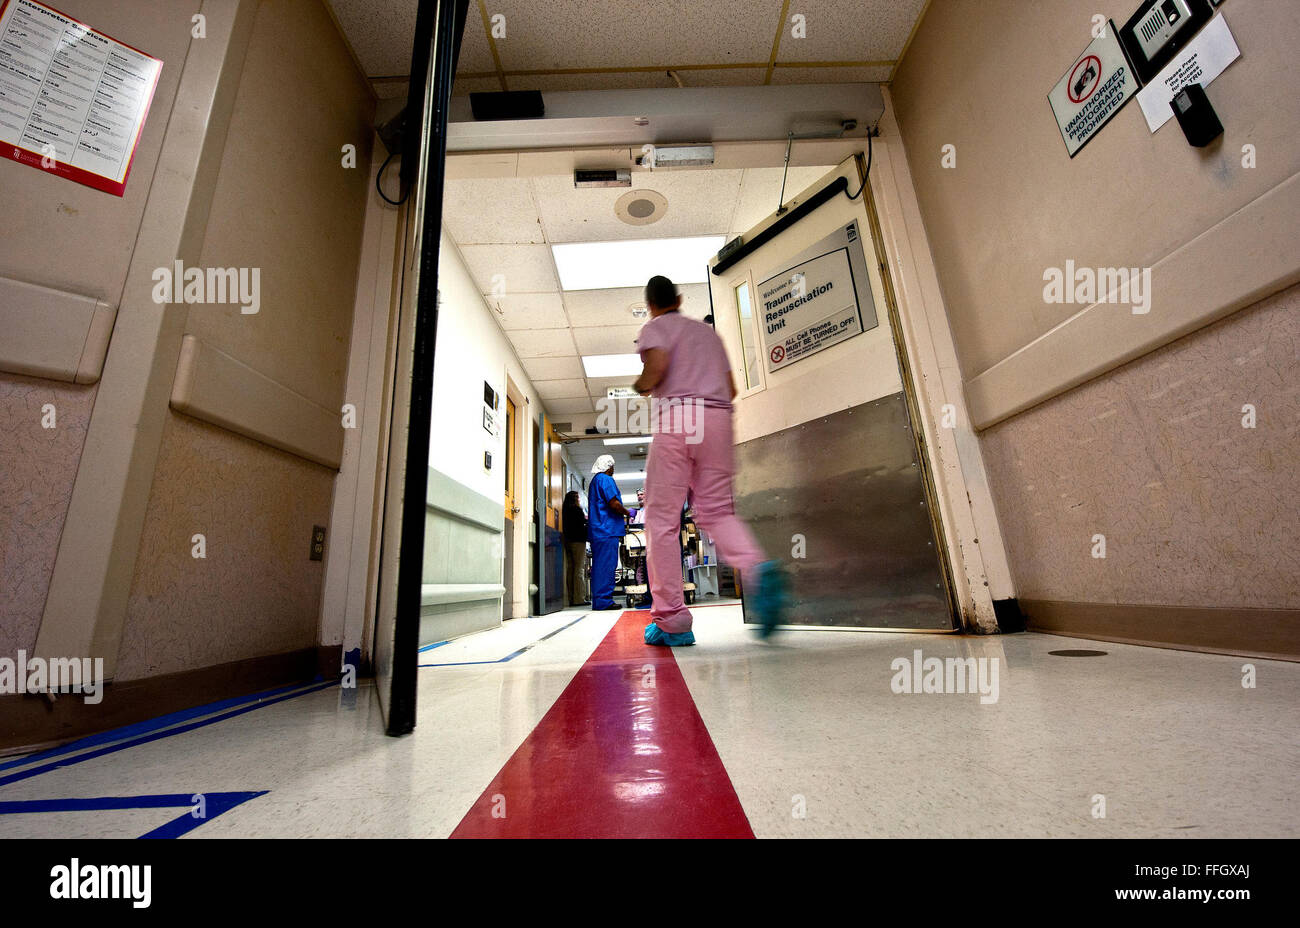 A CSTARS student rushes into the TRU after the transfer of two life-flighted patients of a motor vehicle accident.  Trauma patients are brought in by helicopter and transferred to the fourth floor of the shock trauma center. Stock Photo